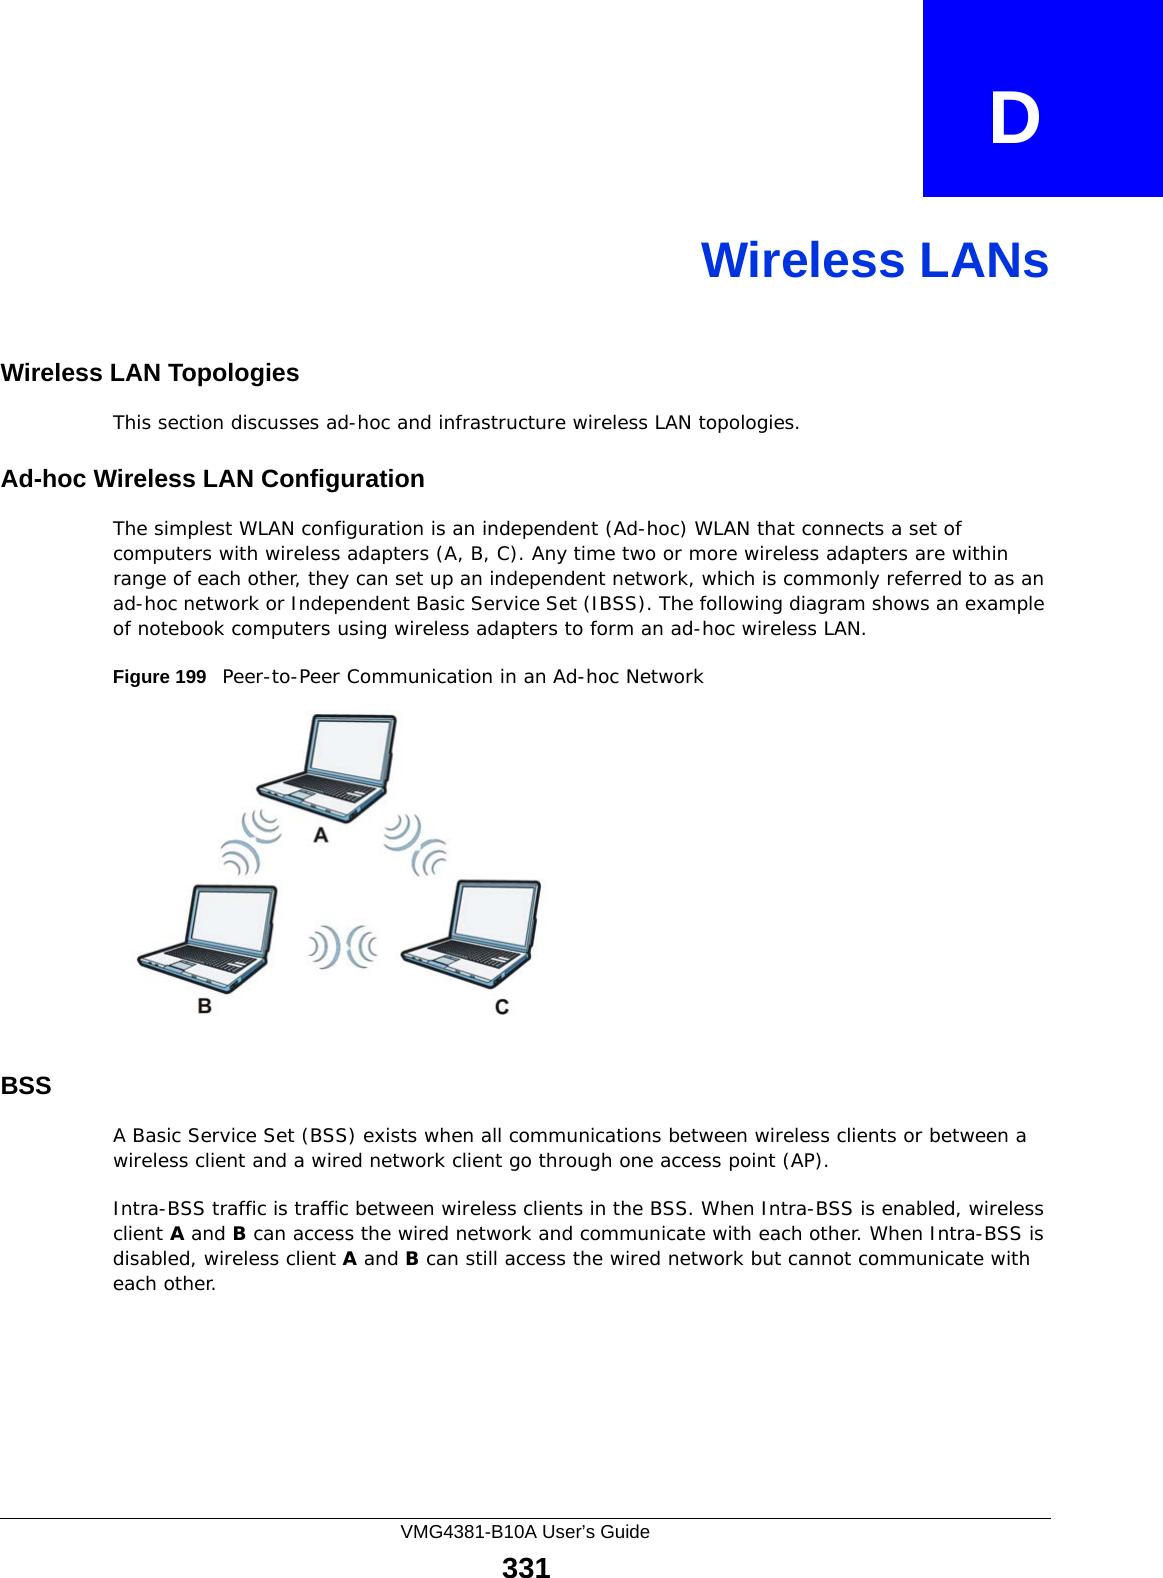 VMG4381-B10A User’s Guide331APPENDIX   DWireless LANsWireless LAN TopologiesThis section discusses ad-hoc and infrastructure wireless LAN topologies.Ad-hoc Wireless LAN ConfigurationThe simplest WLAN configuration is an independent (Ad-hoc) WLAN that connects a set of computers with wireless adapters (A, B, C). Any time two or more wireless adapters are within range of each other, they can set up an independent network, which is commonly referred to as an ad-hoc network or Independent Basic Service Set (IBSS). The following diagram shows an example of notebook computers using wireless adapters to form an ad-hoc wireless LAN. Figure 199   Peer-to-Peer Communication in an Ad-hoc NetworkBSSA Basic Service Set (BSS) exists when all communications between wireless clients or between a wireless client and a wired network client go through one access point (AP). Intra-BSS traffic is traffic between wireless clients in the BSS. When Intra-BSS is enabled, wireless client A and B can access the wired network and communicate with each other. When Intra-BSS is disabled, wireless client A and B can still access the wired network but cannot communicate with each other.